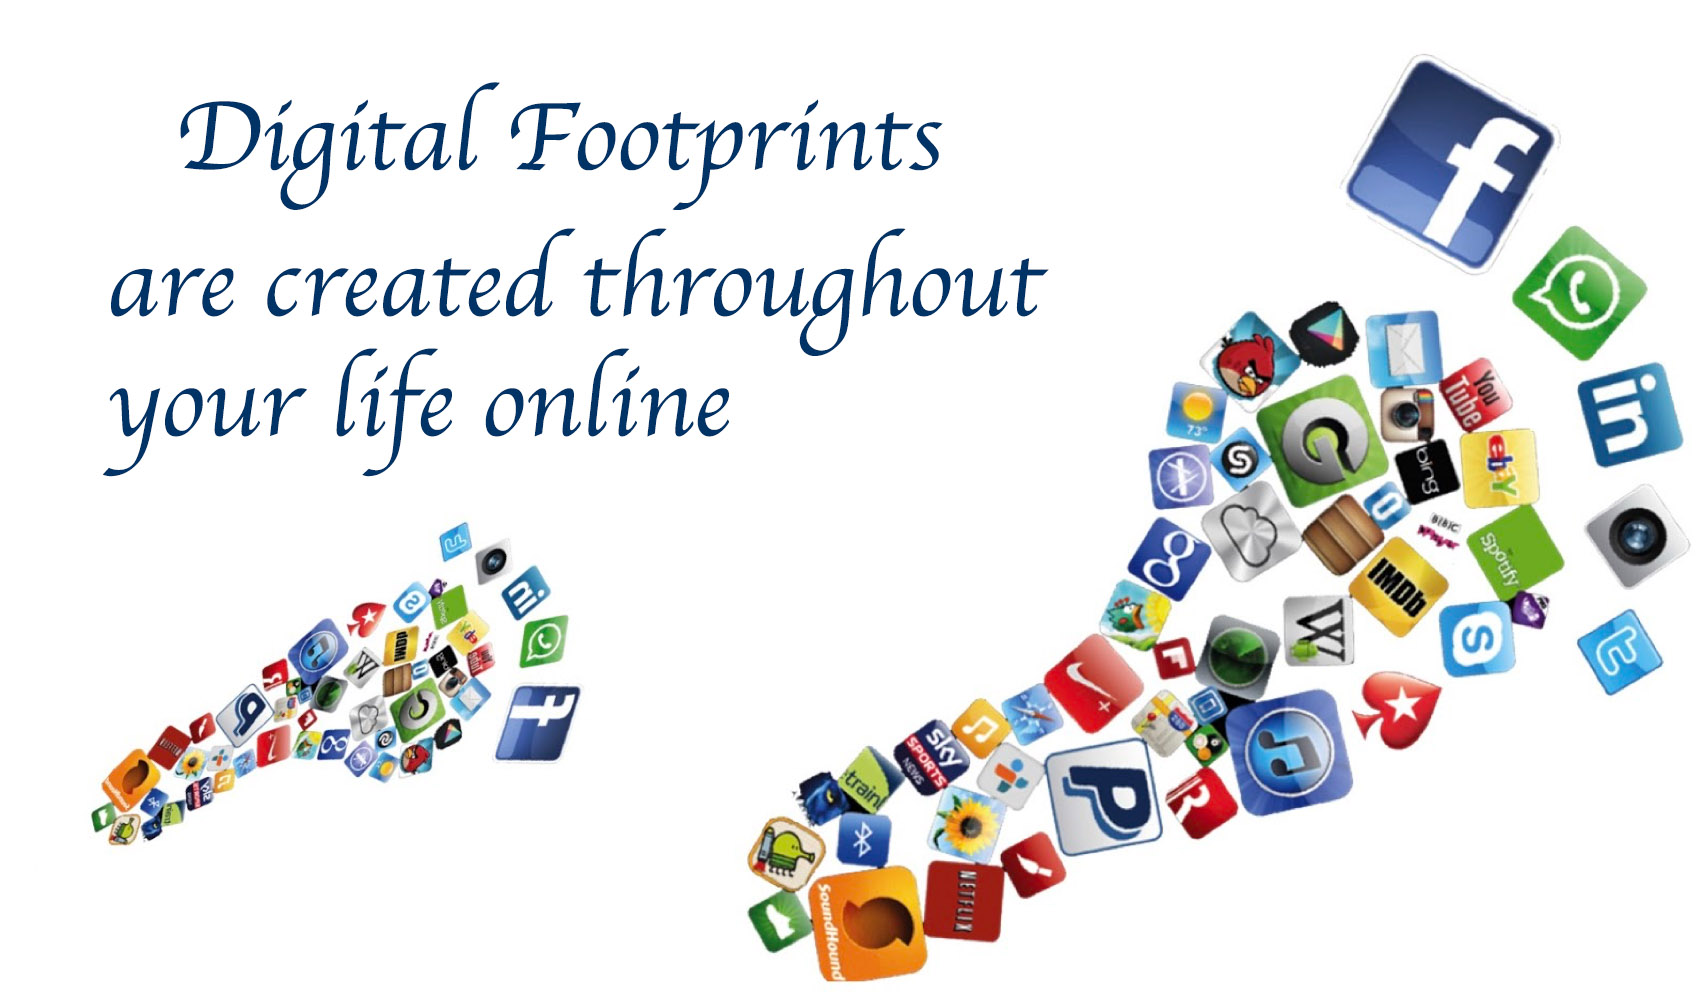 Two footprint image made up of icons from social media, apps, and applications, with the text: Digital Footprints are created throughout your life online.